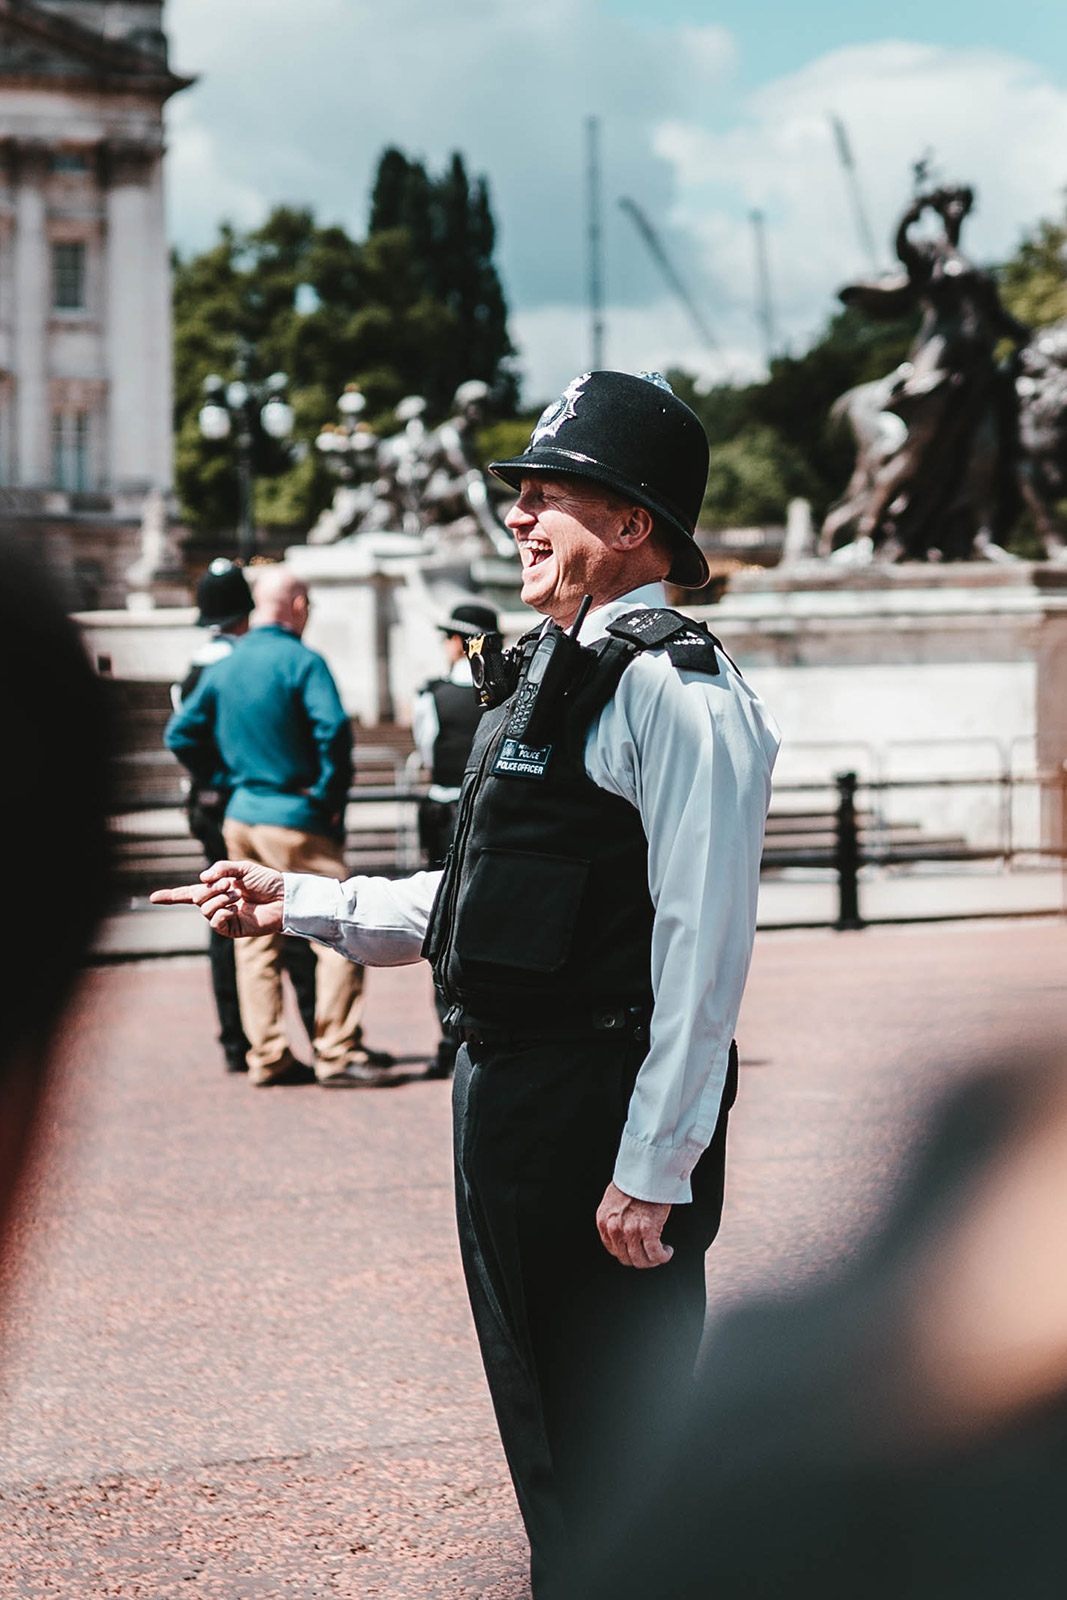 Police offer smiling and standing outside on a sunny day